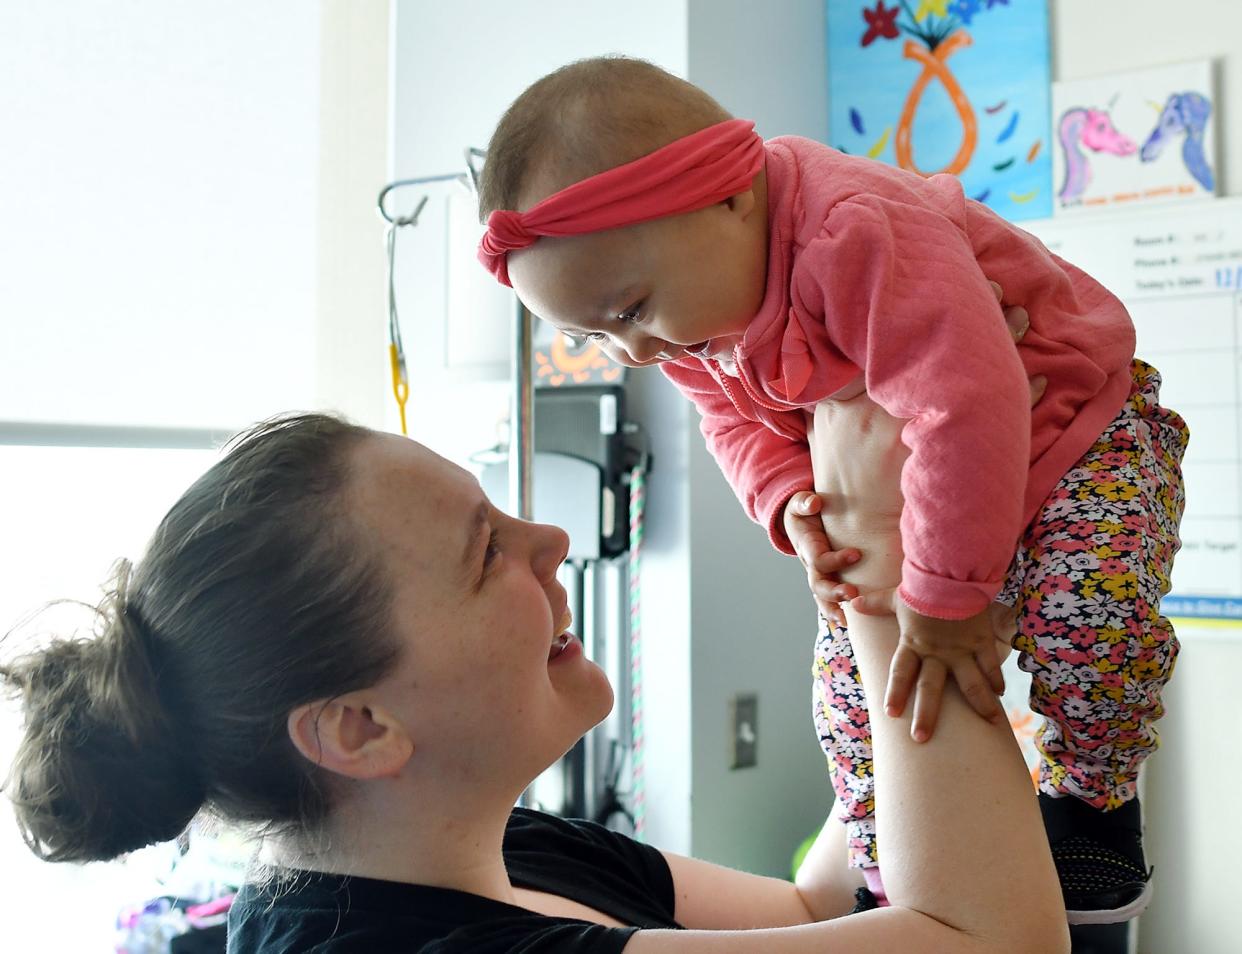 In a file photo, a mother plays with her 11-month-old daughter at UMass Memorial Children's Medical Center.